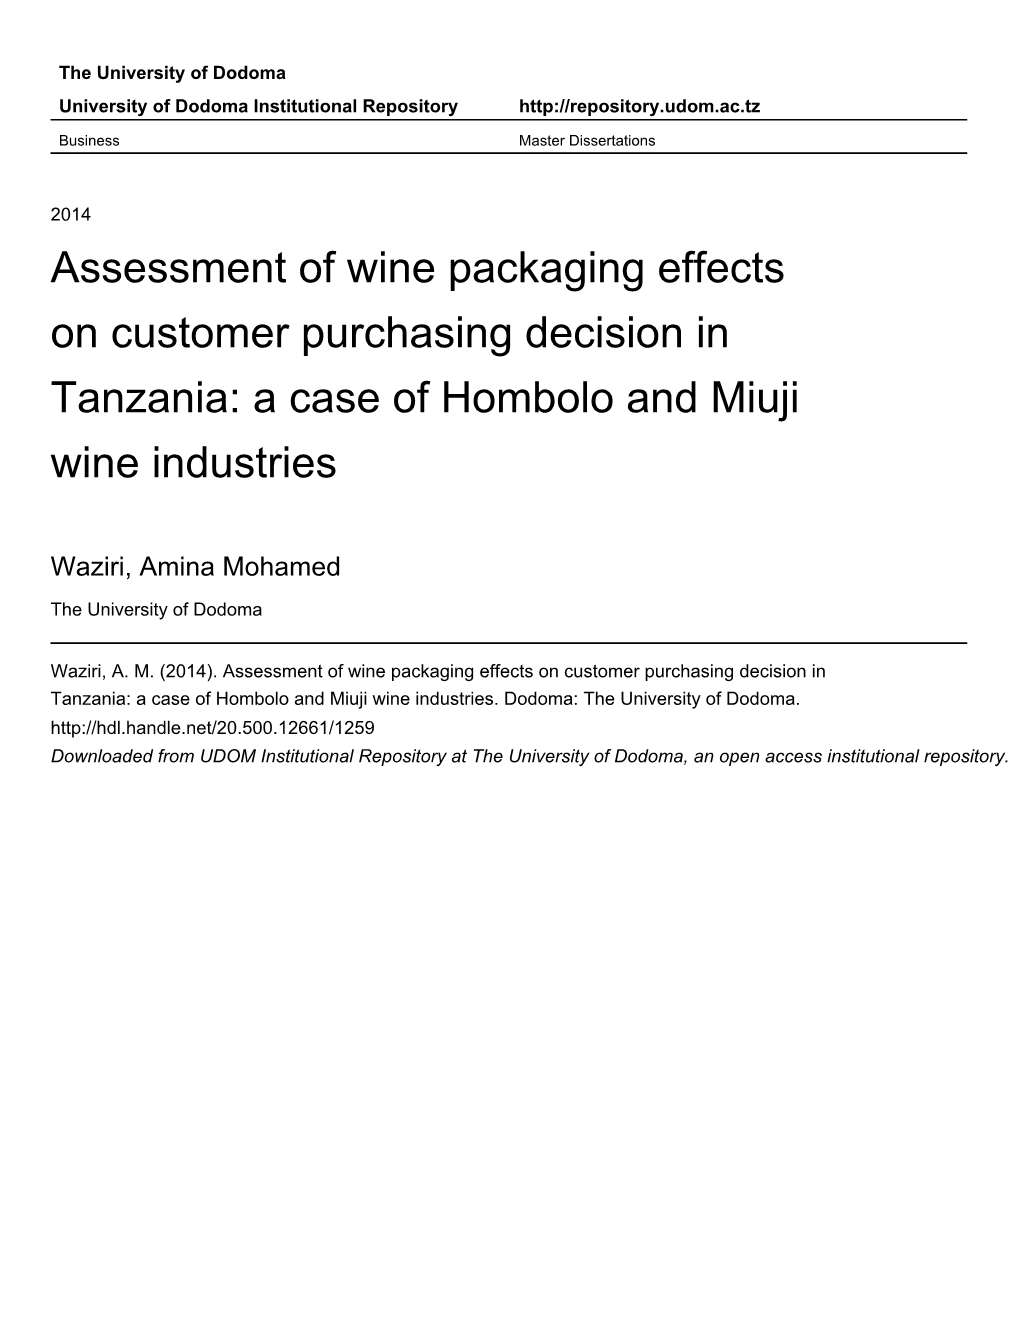 Assessment of Wine Packaging Effects on Customer Purchasing Decision in Tanzania: a Case of Hombolo and Miuji Wine Industries